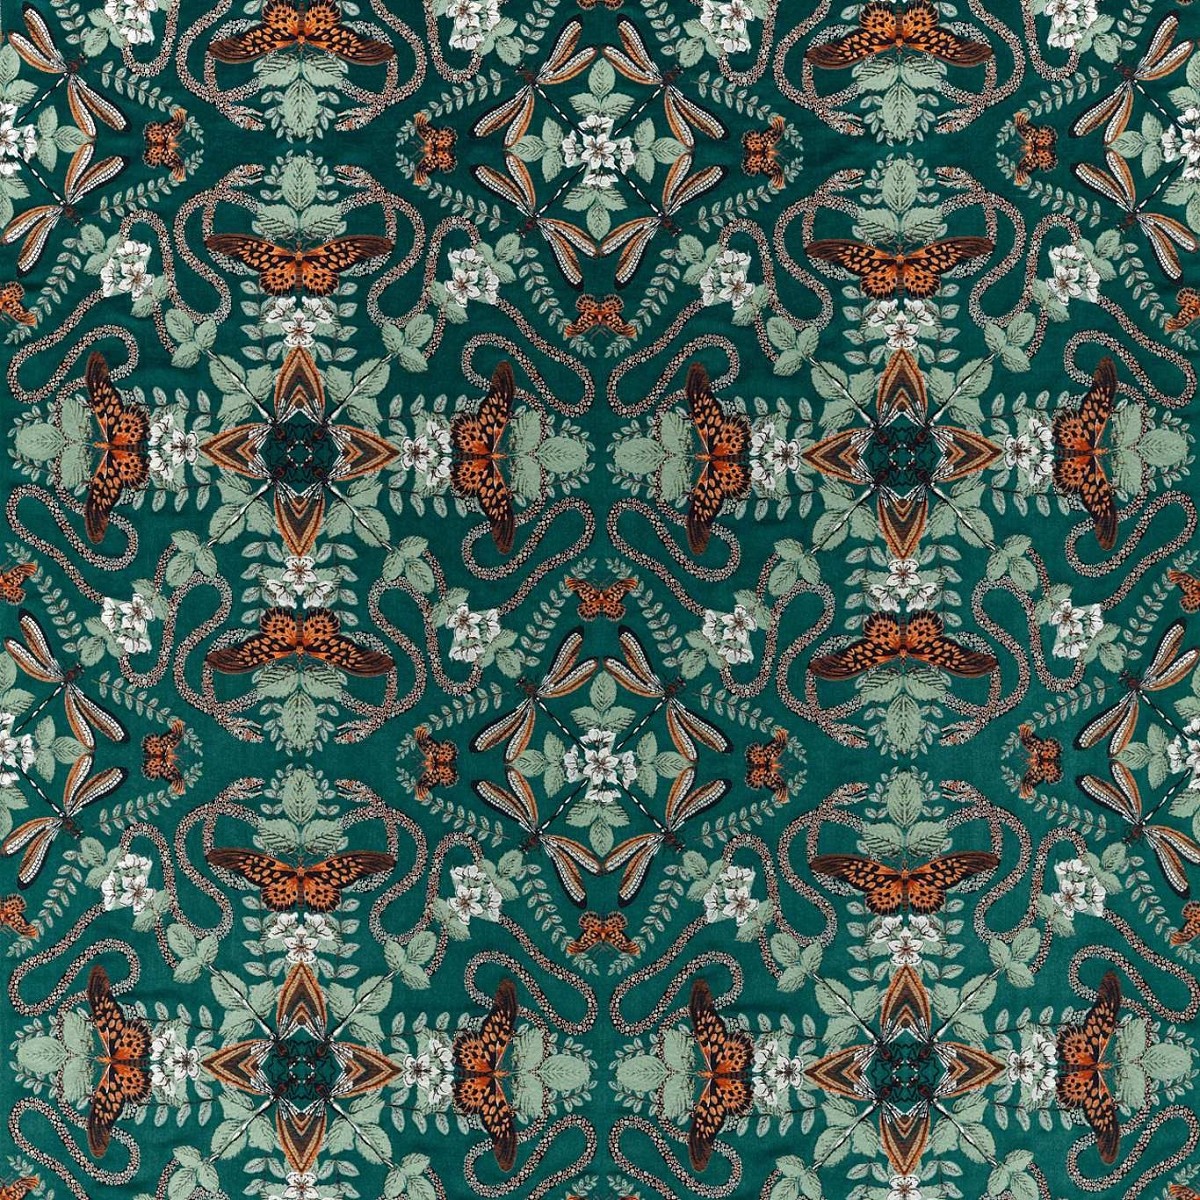 Emerald Forest Teal Jacquard Fabric by Clarke & Clarke